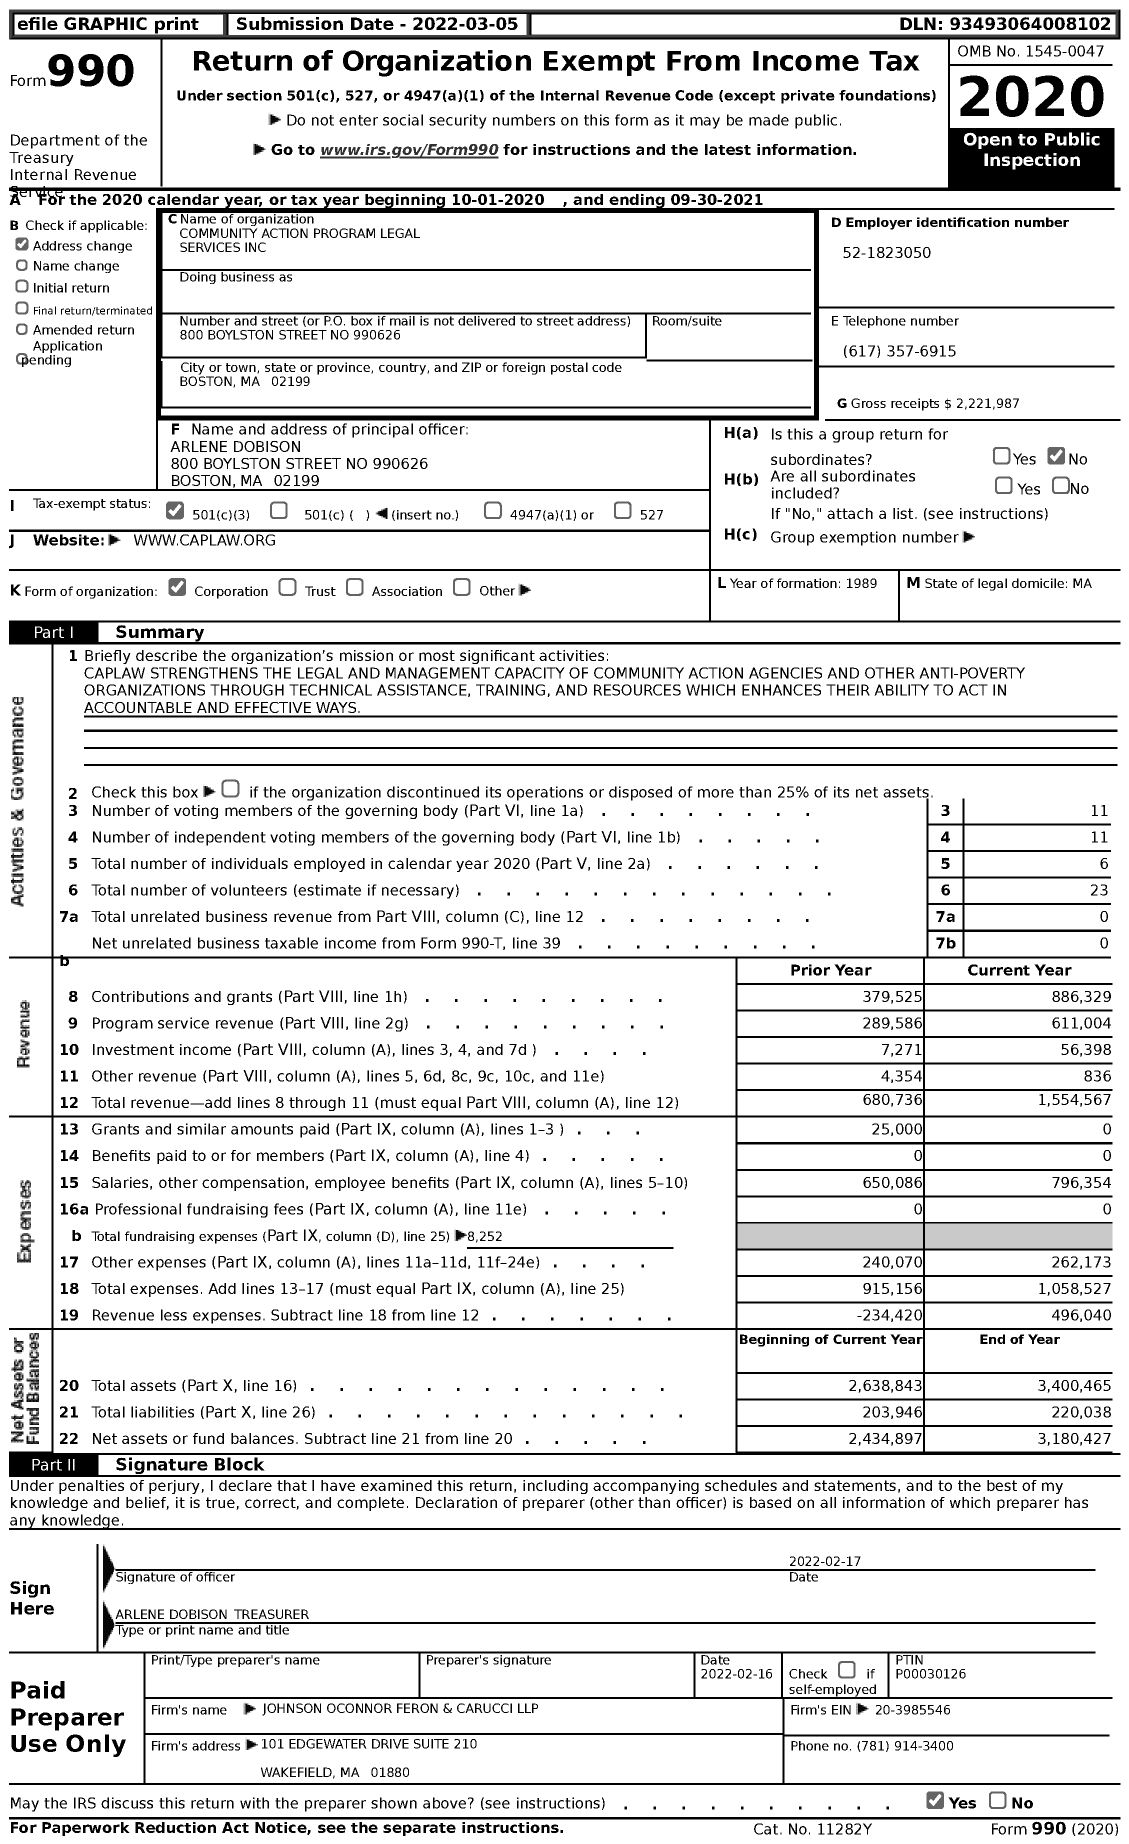 Image of first page of 2020 Form 990 for Community Action Program Legal Services